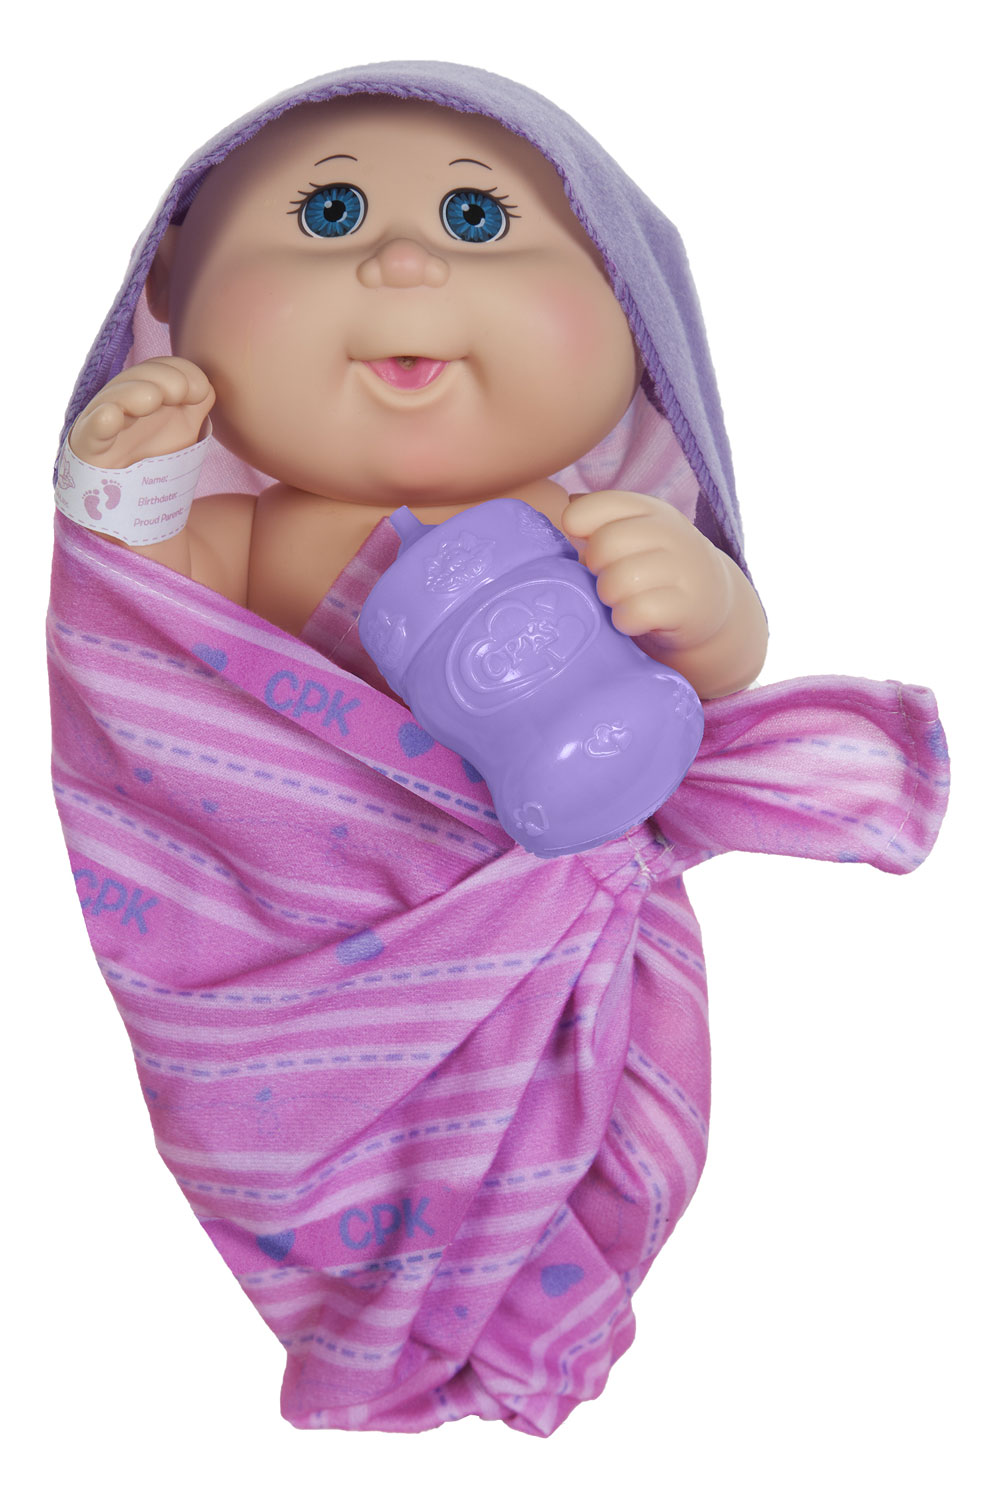 cabbage patch do